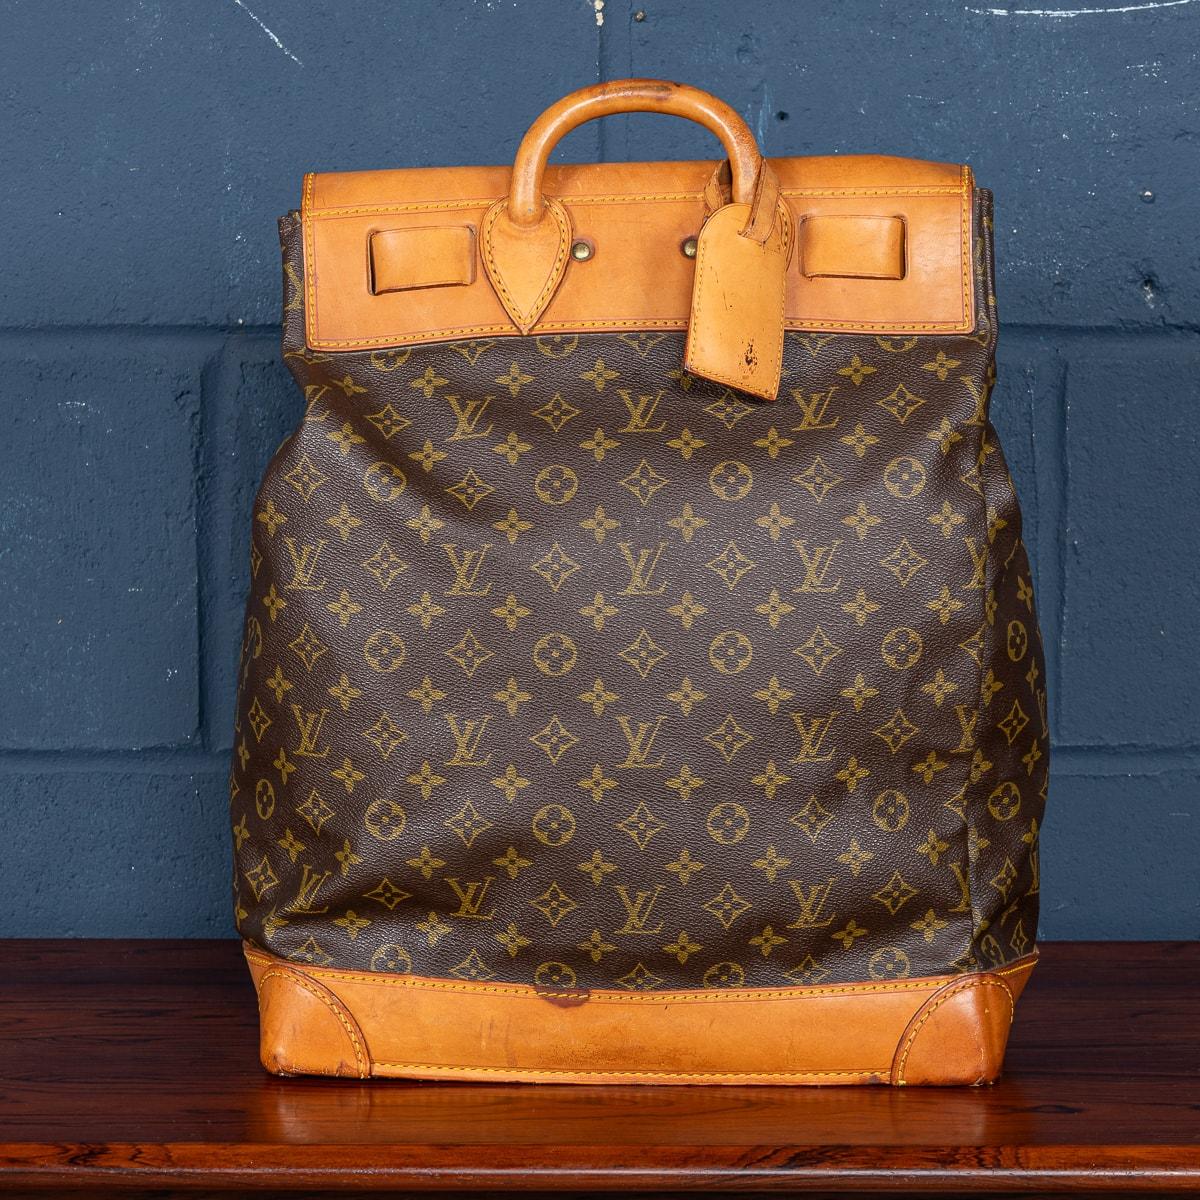 20th Century Louis Vuitton Steamer Bag In Monogram Canvas, Made In France In Good Condition For Sale In Royal Tunbridge Wells, Kent